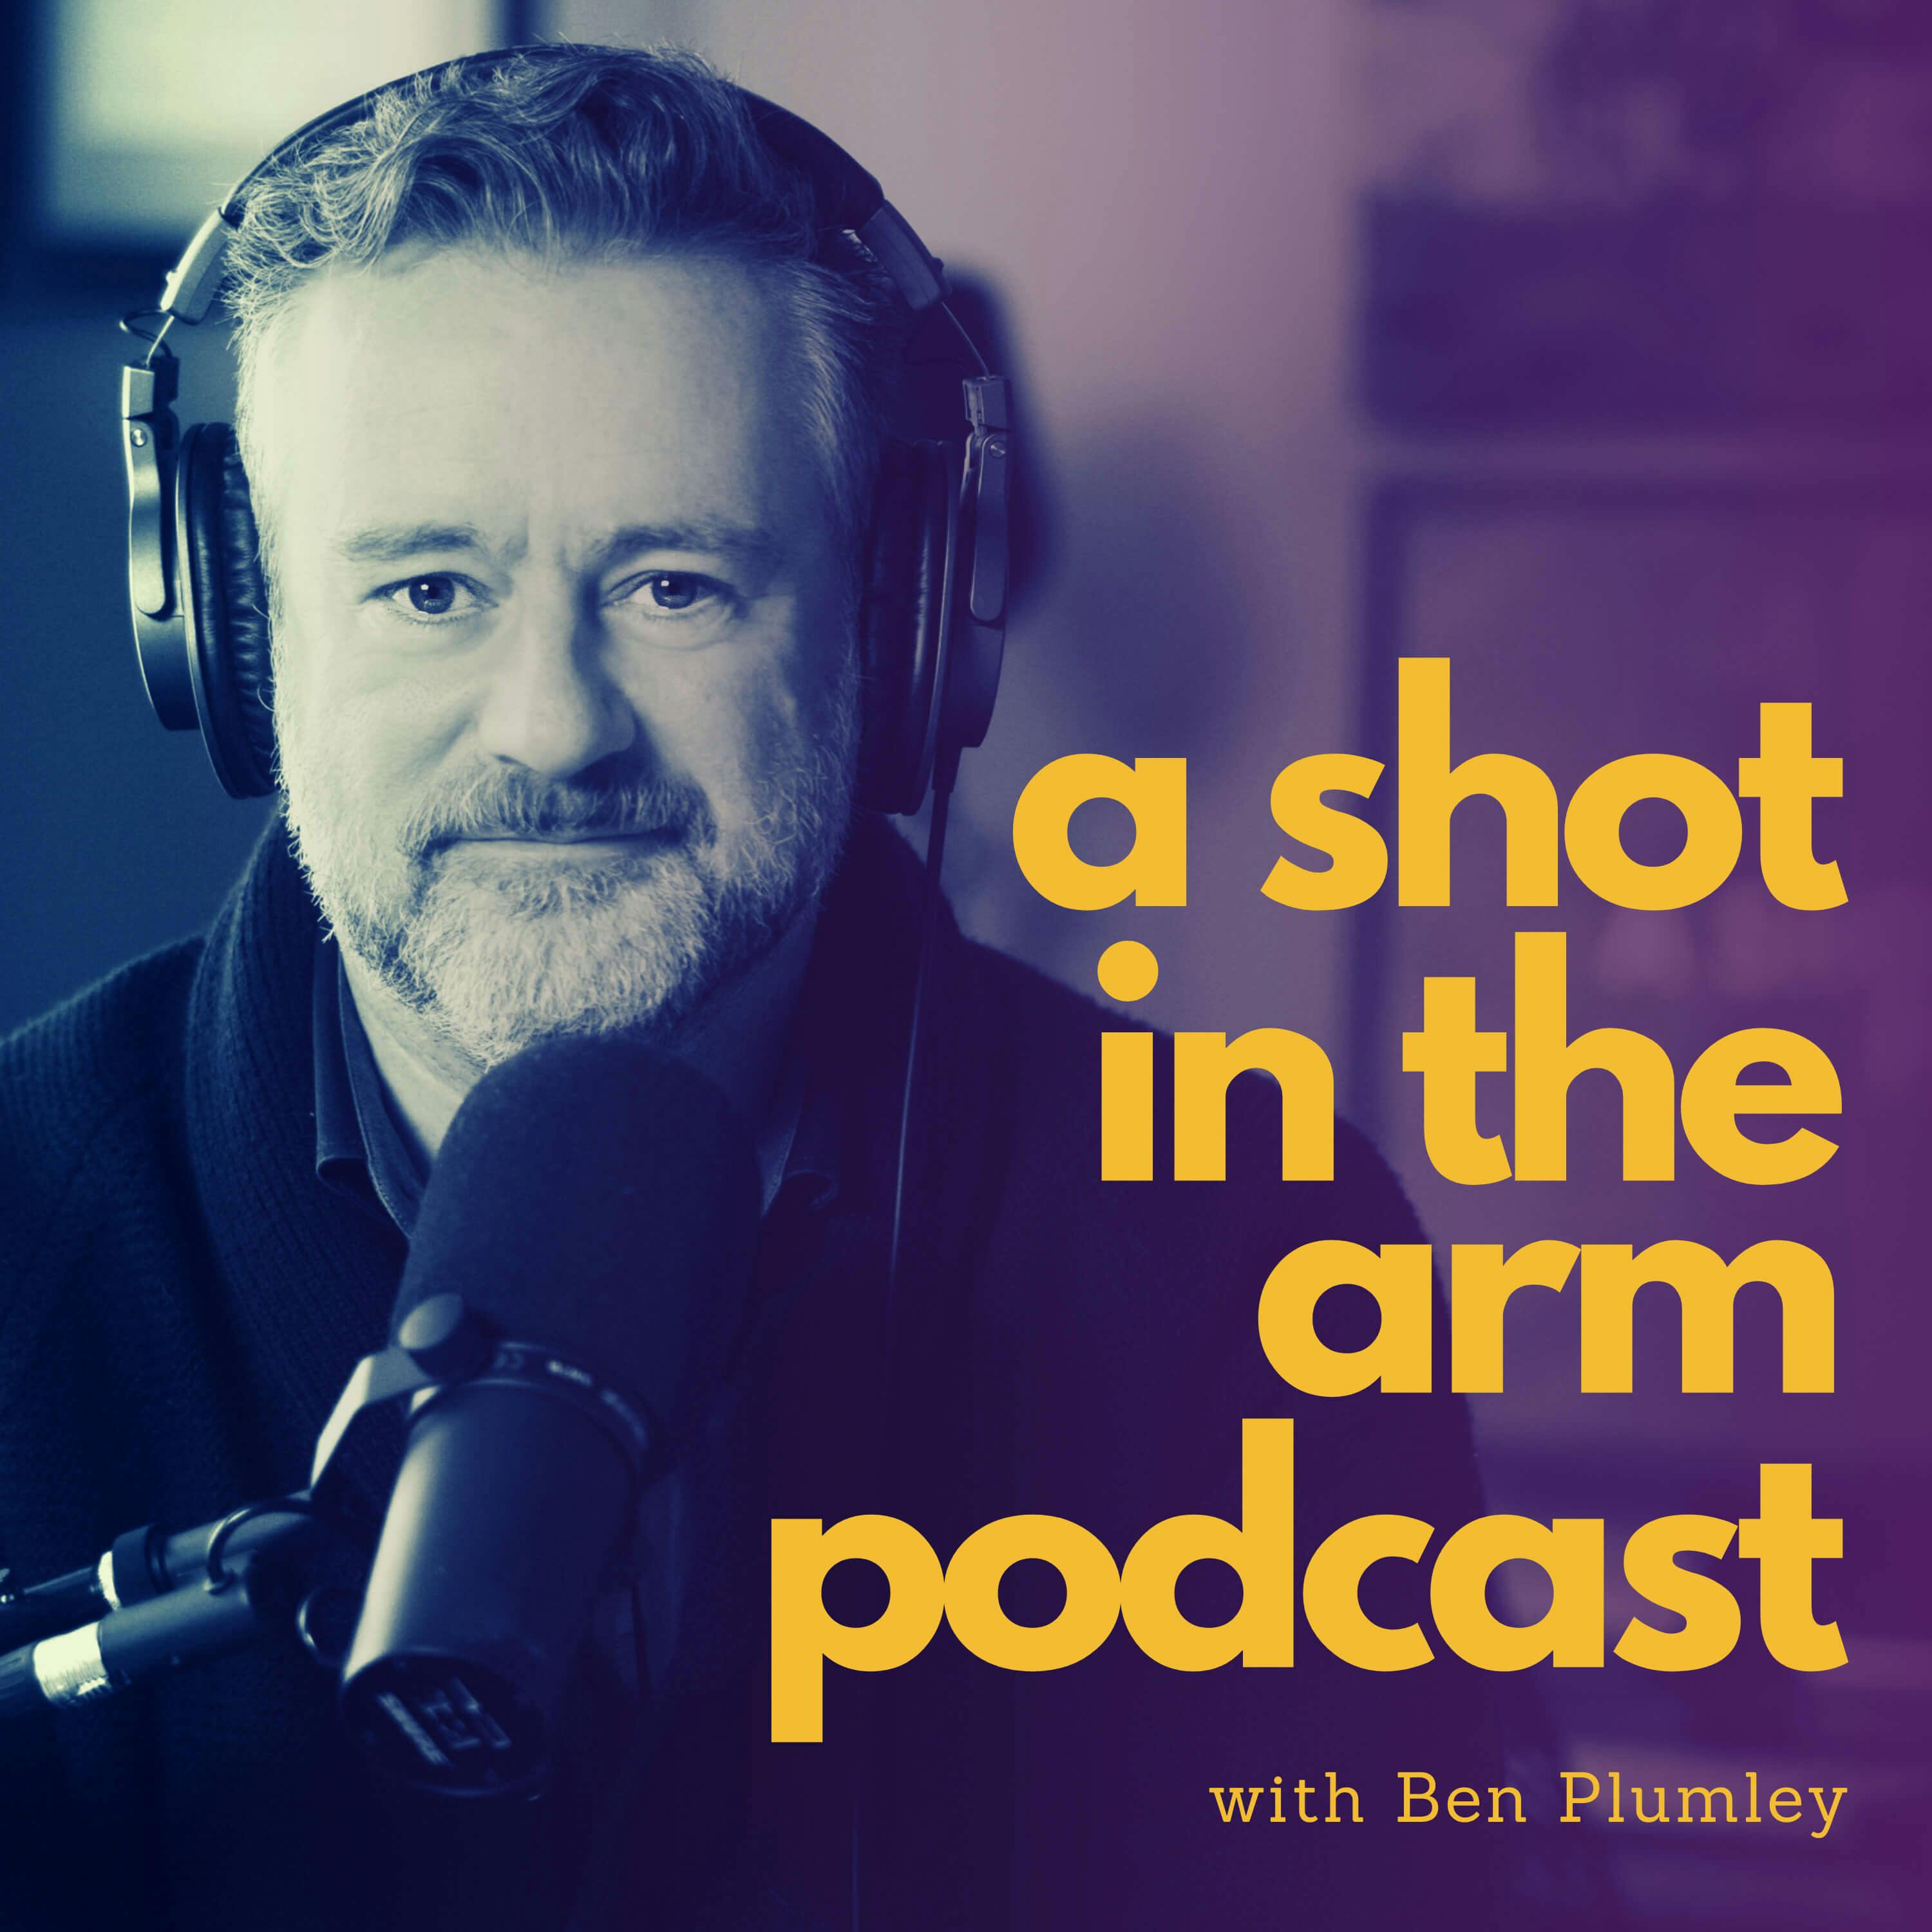 A Shot in the Arm Podcast: Conversations in Global Health with Jeff Sturchio